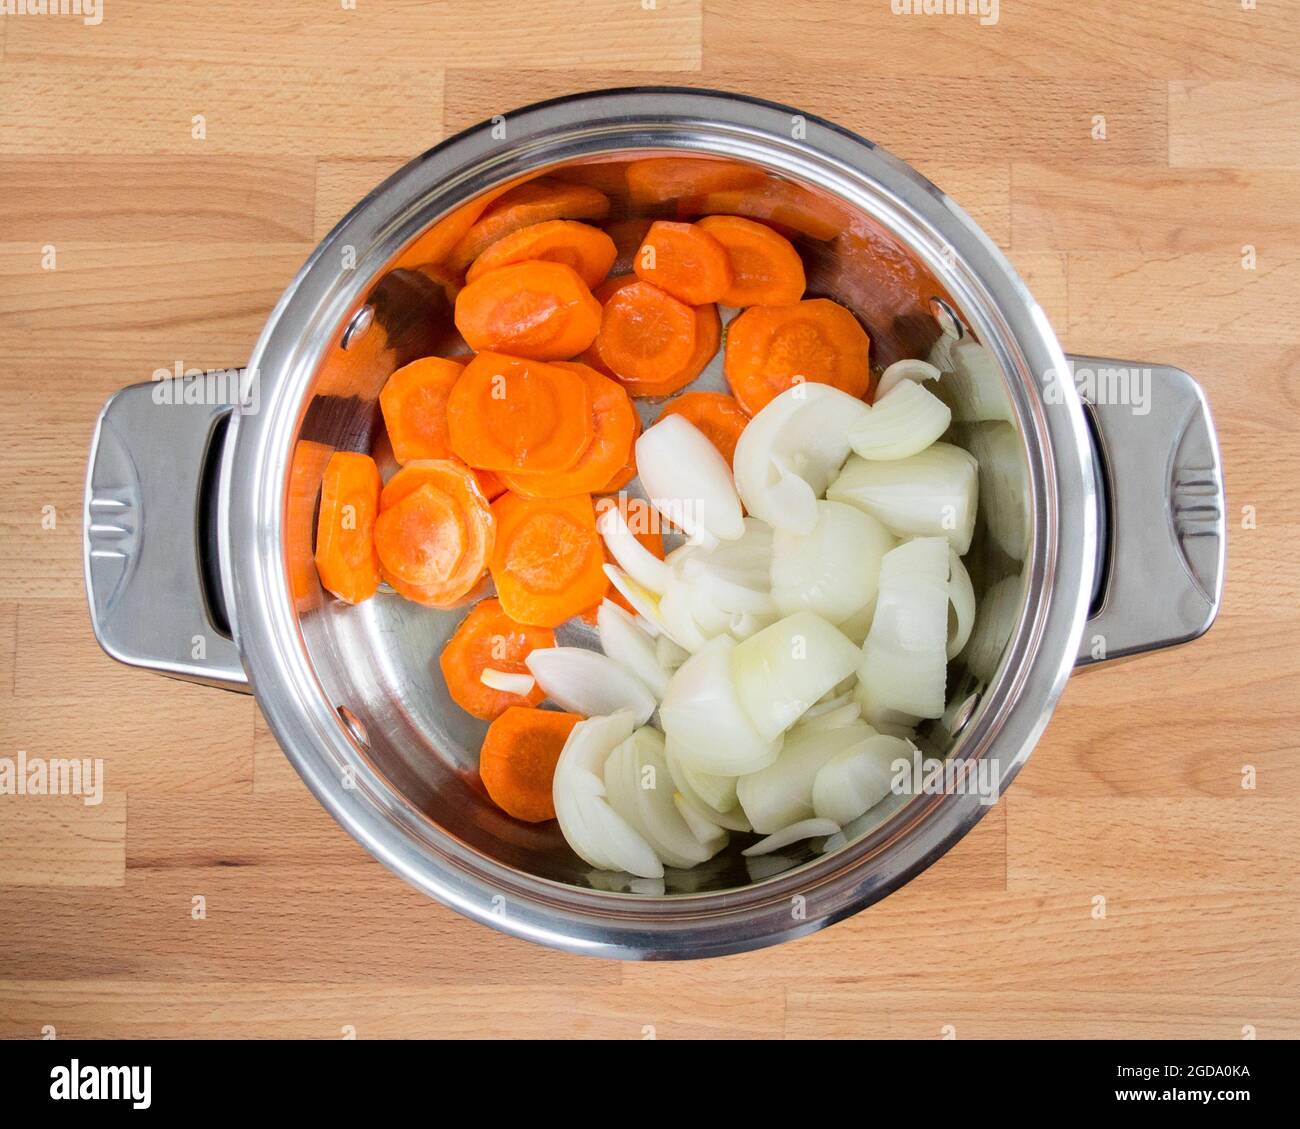 .Chopped onions and carrots in a saucepan. Preparation for frying. Stock Photo